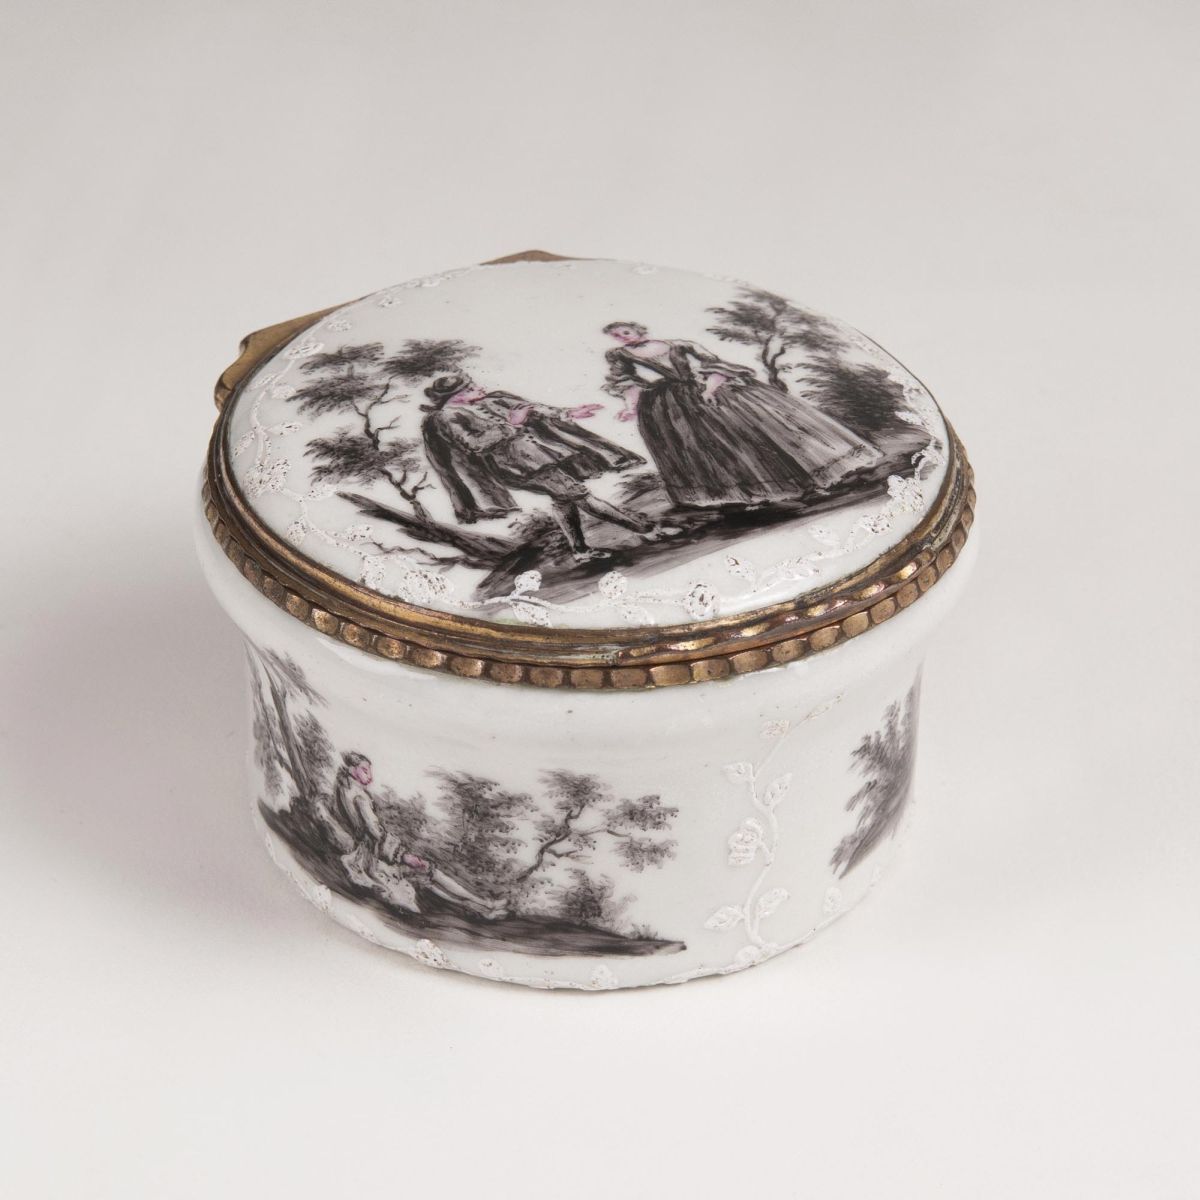 An Enameled Box with Watteau Scenesin in Grisaille Painting